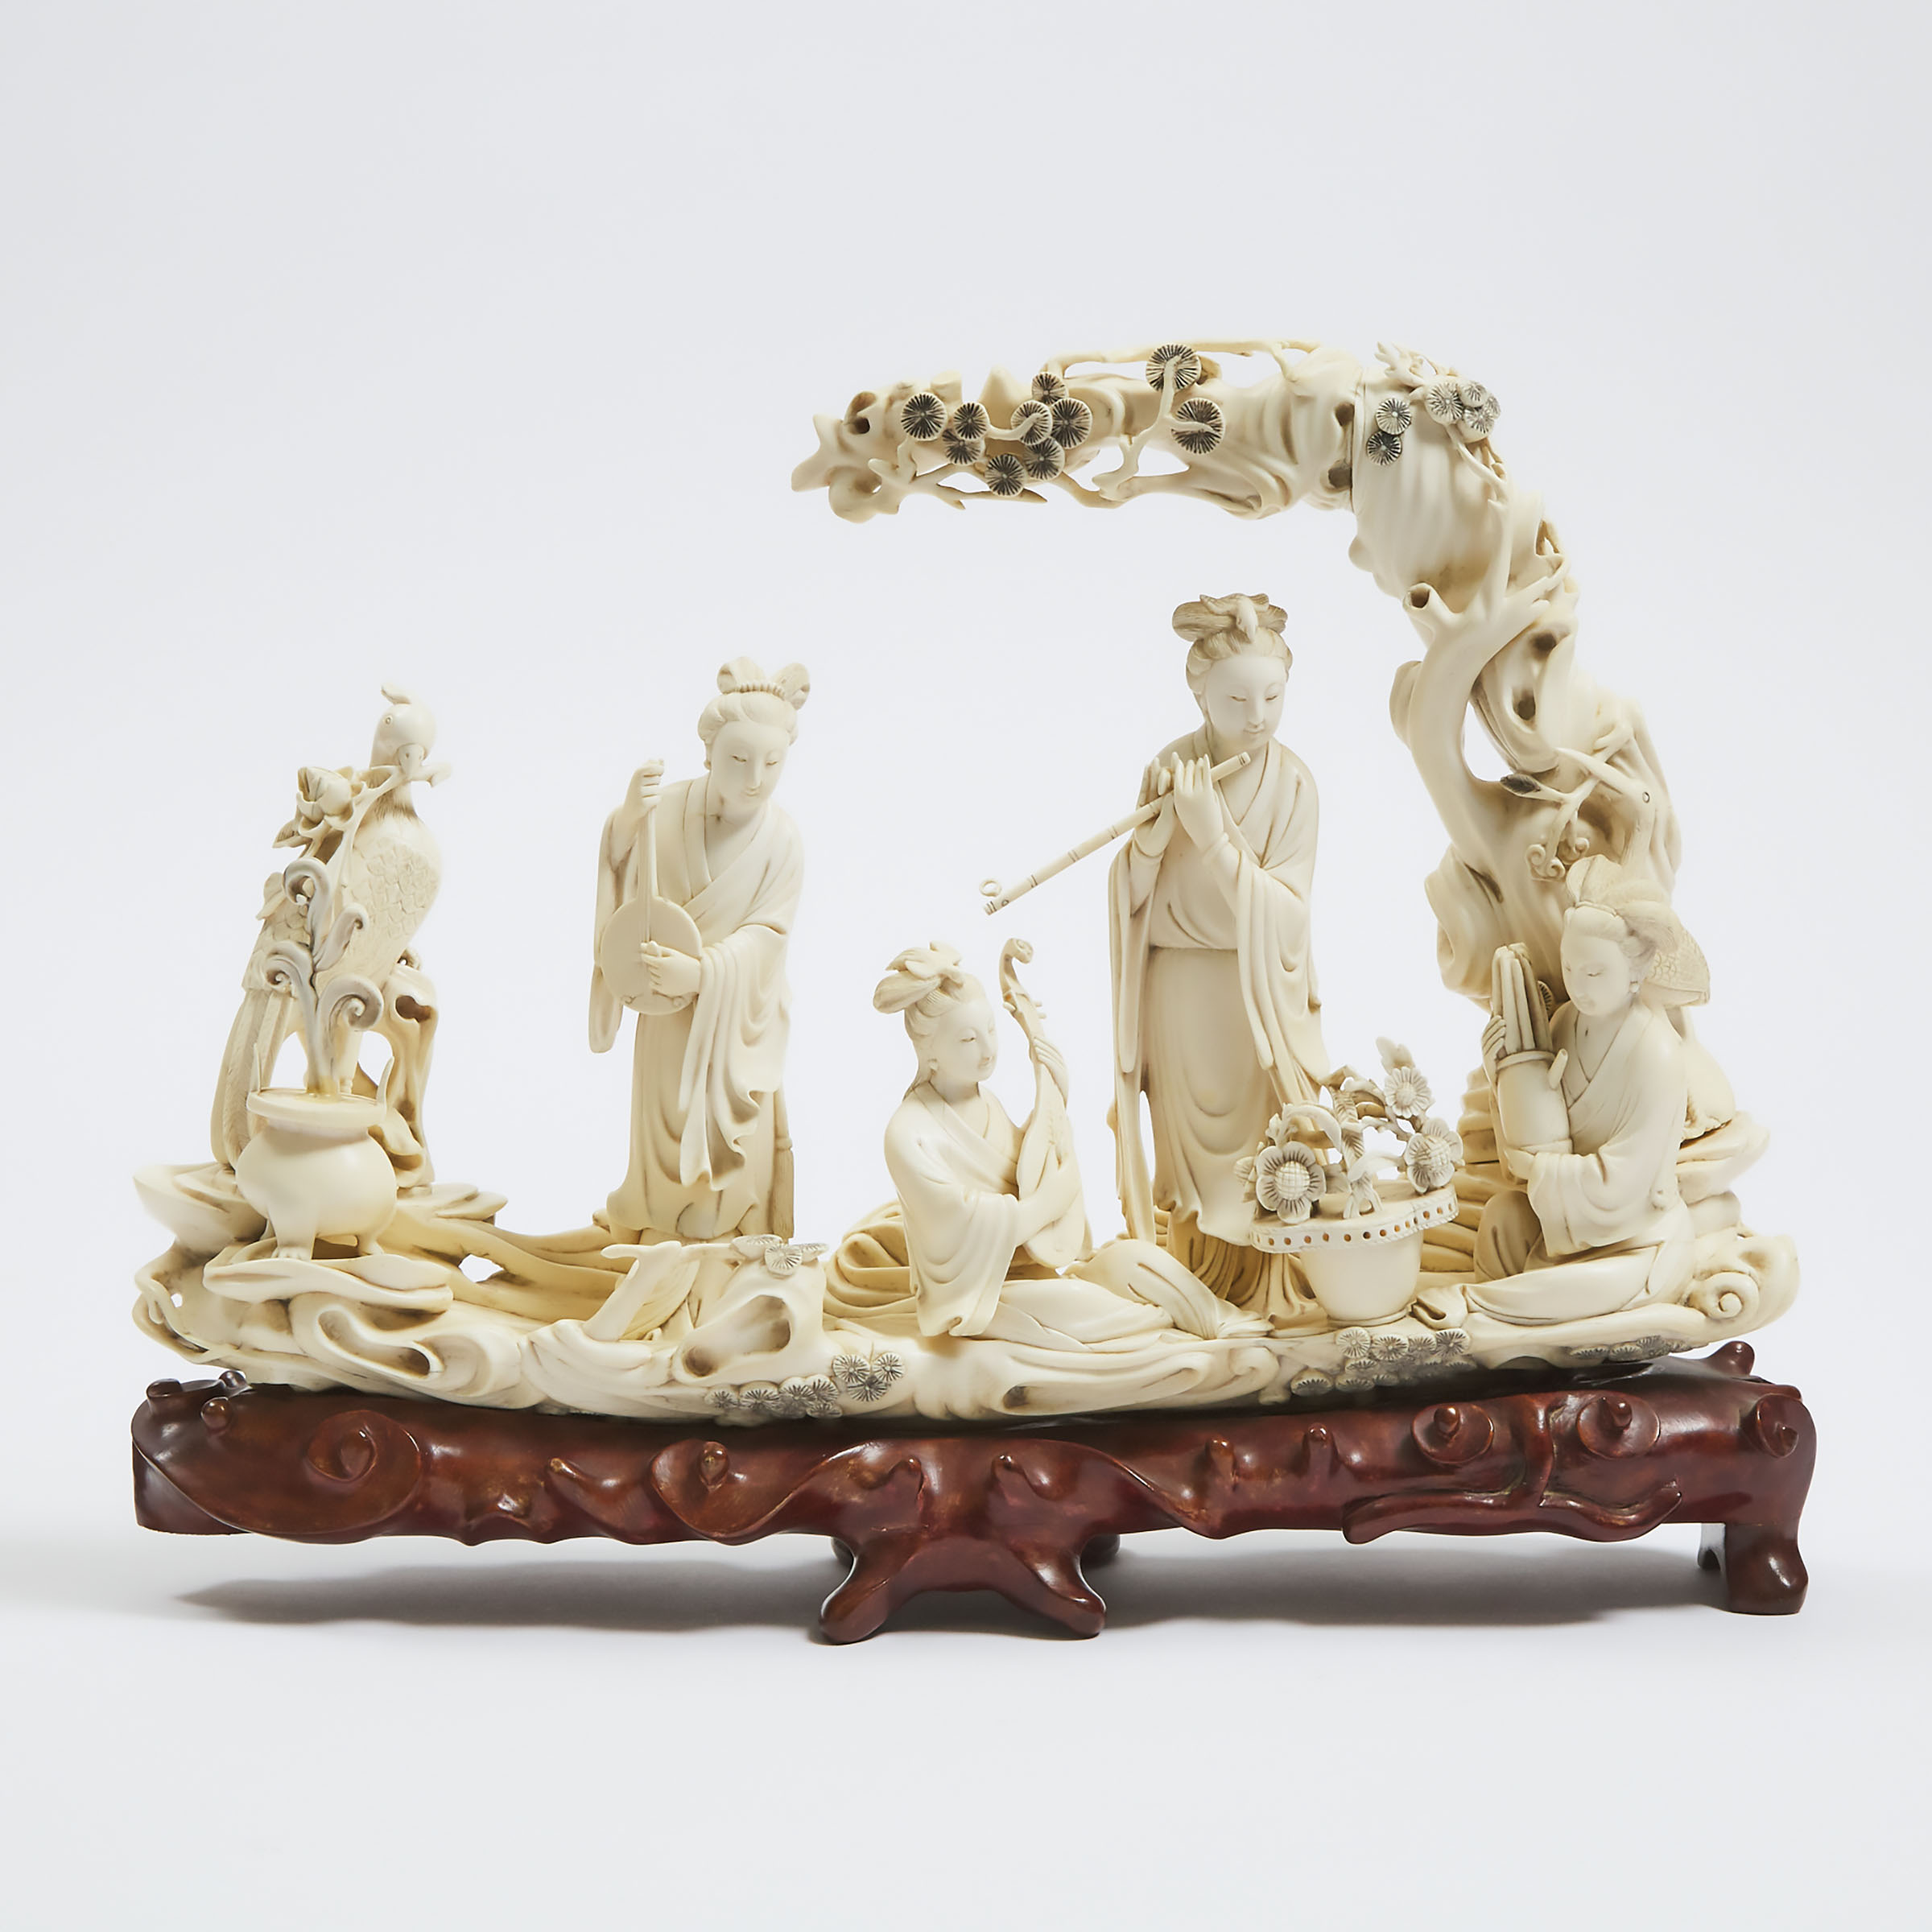 A Chinese Carved Ivory Group of Female Musicians, Early 20th Century